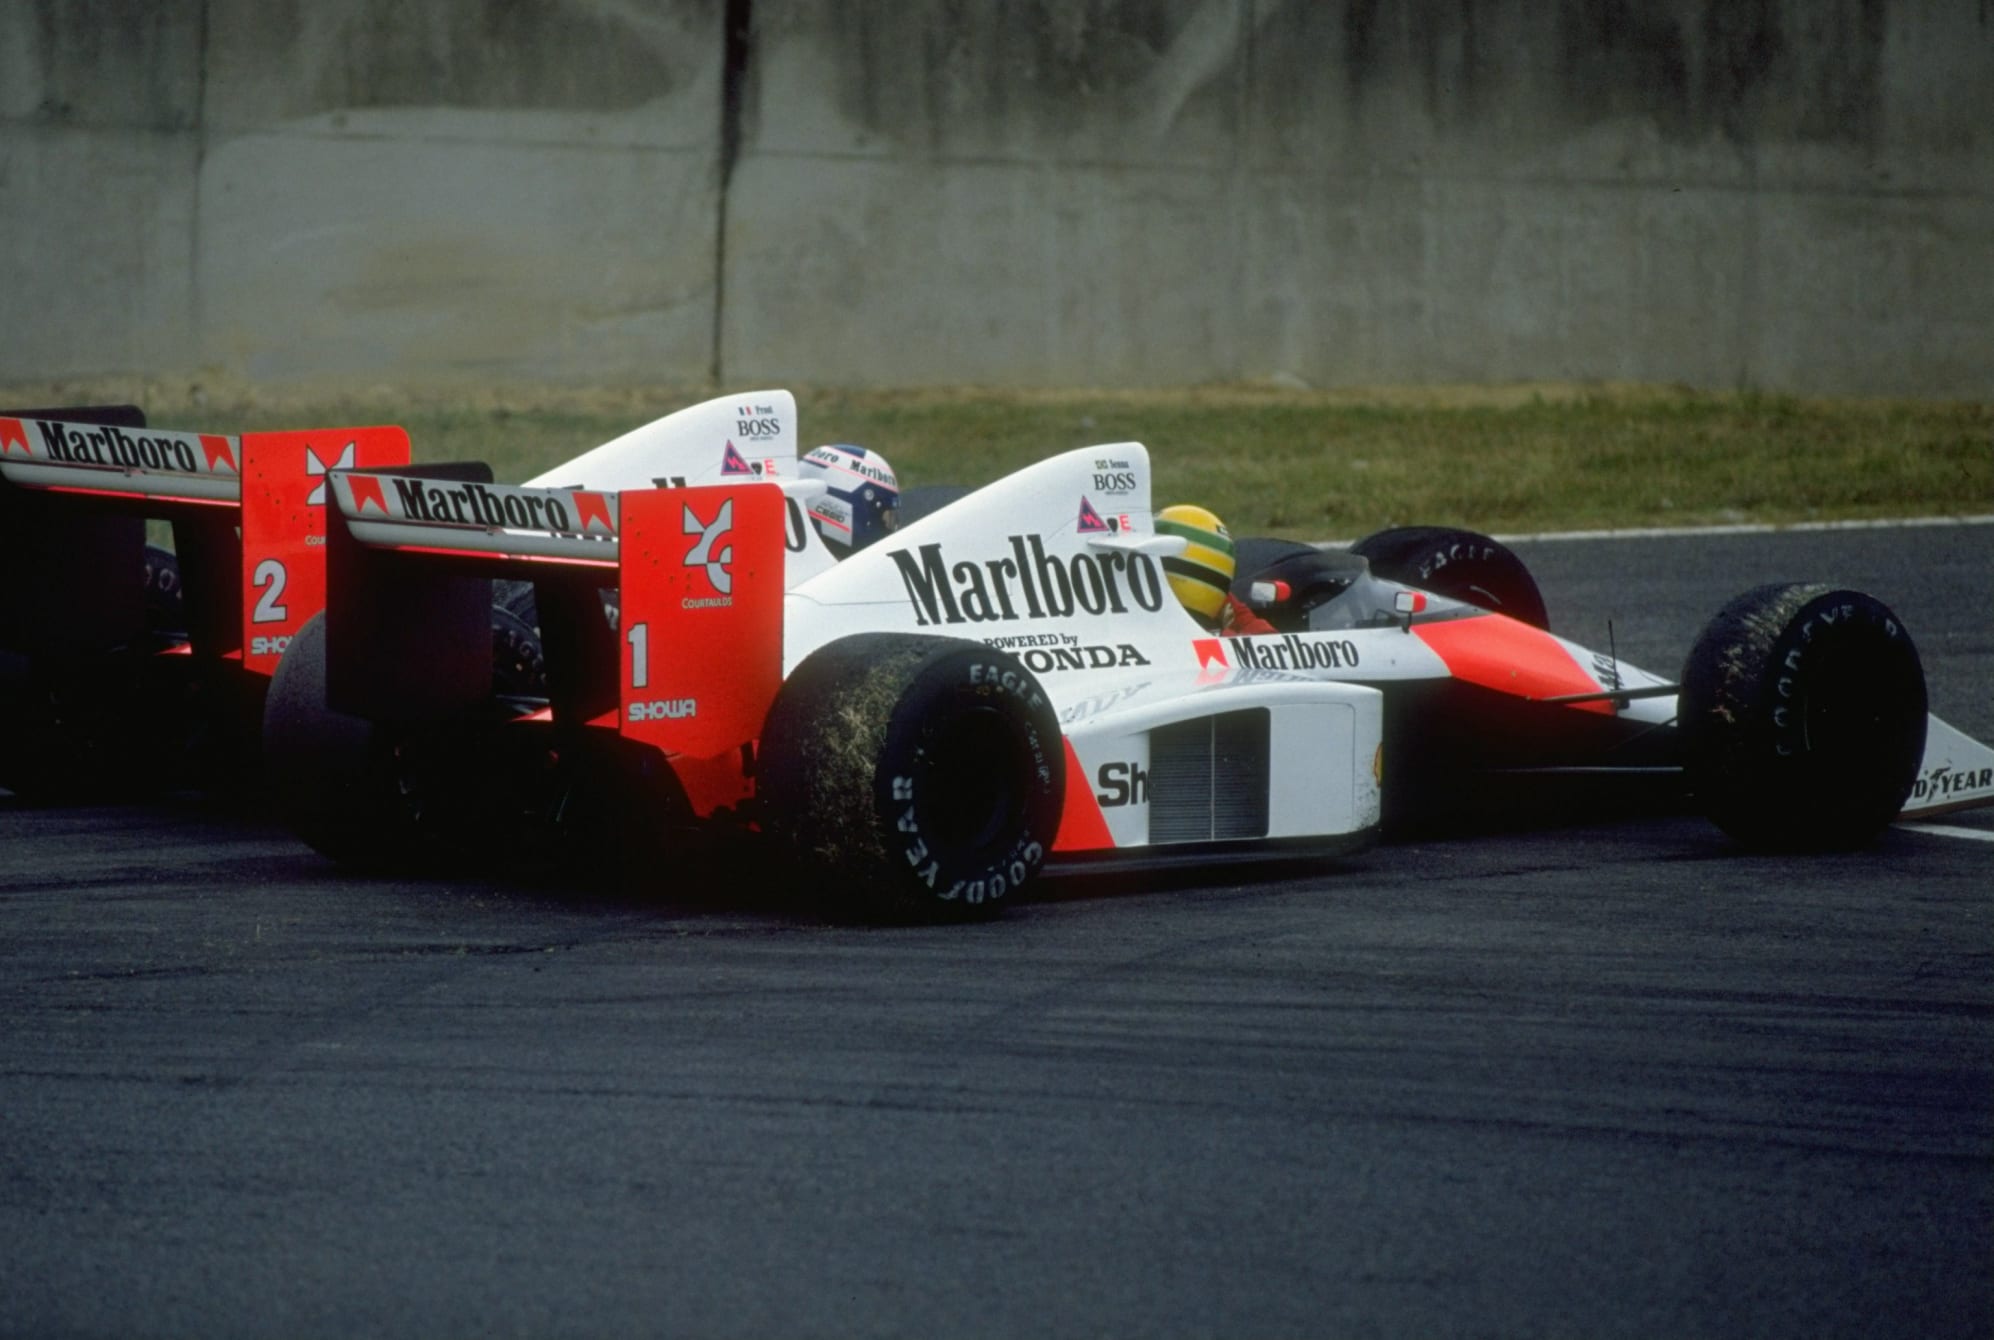 Ayrton Senna and Alain Prost infamous collide at the 1989 Japanese Grand Prix.